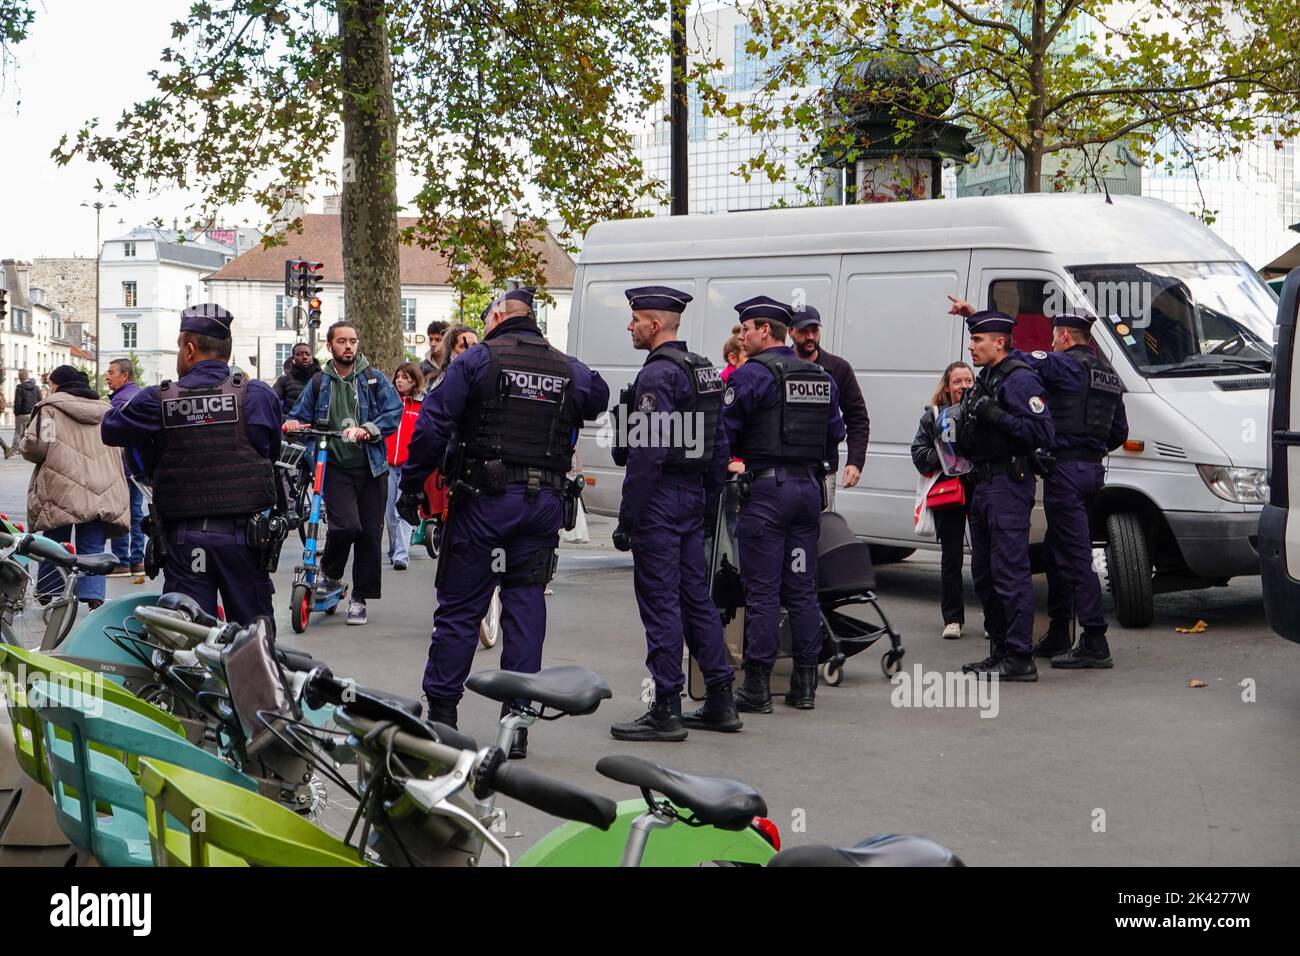 Thursday, 29 September 2022. Paris, France. Union demonstrators peacefully march from Denfert-Rochereau to Place Bastille, on nationwide day of workers protests, calling for an increase in wages due to the rise of the cost of living, and also in protest of plans by President Emmanuel Macron to reform the French retirement system. Police wait nearby, directing non-participating pedestrians away from the area of the protest. Stock Photo